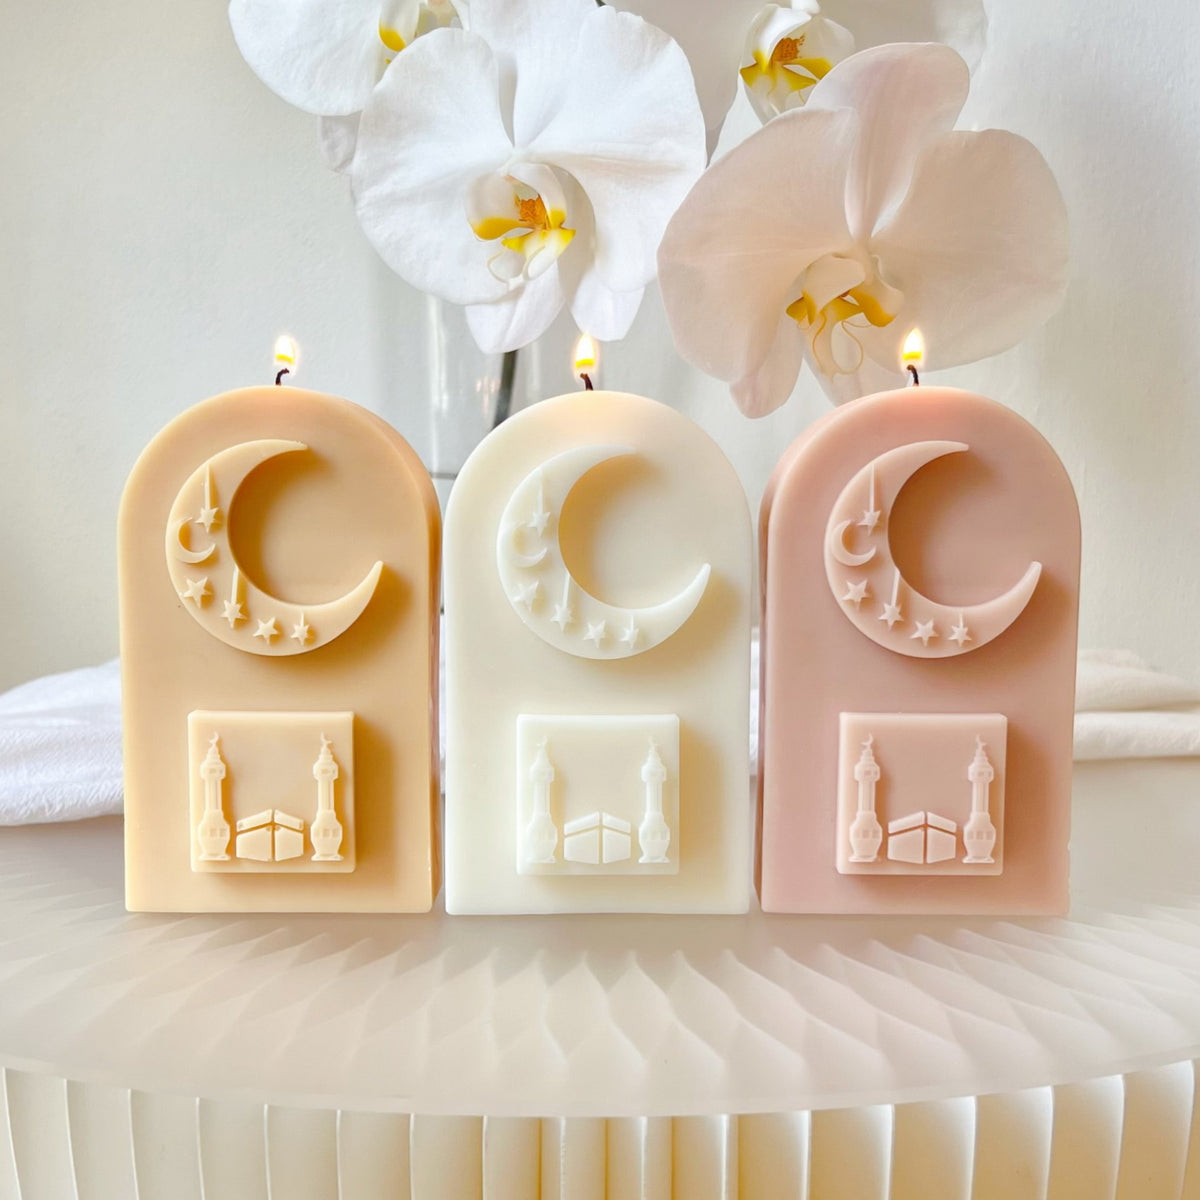 Arch Shaped Ramadan Candle - Eid Décor & Gifts | LMJ Candles